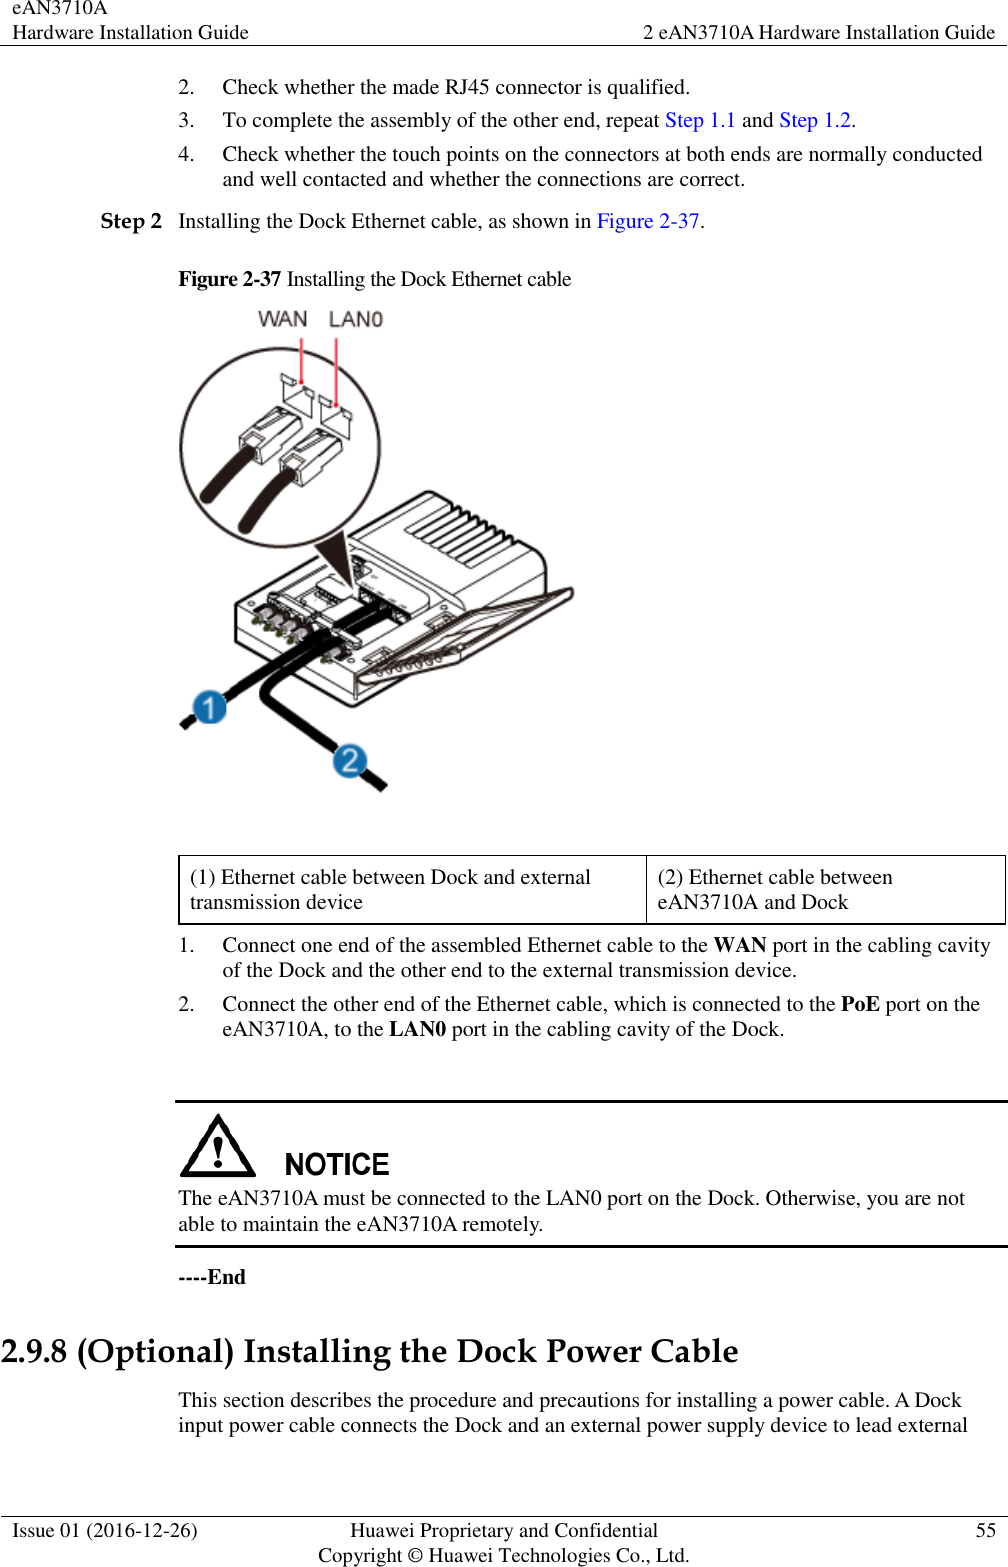 eAN3710A Hardware Installation Guide 2 eAN3710A Hardware Installation Guide  Issue 01 (2016-12-26) Huawei Proprietary and Confidential                                     Copyright © Huawei Technologies Co., Ltd. 55  2. Check whether the made RJ45 connector is qualified. 3. To complete the assembly of the other end, repeat Step 1.1 and Step 1.2. 4. Check whether the touch points on the connectors at both ends are normally conducted and well contacted and whether the connections are correct. Step 2 Installing the Dock Ethernet cable, as shown in Figure 2-37. Figure 2-37 Installing the Dock Ethernet cable   (1) Ethernet cable between Dock and external transmission device (2) Ethernet cable between eAN3710A and Dock 1. Connect one end of the assembled Ethernet cable to the WAN port in the cabling cavity of the Dock and the other end to the external transmission device.   2. Connect the other end of the Ethernet cable, which is connected to the PoE port on the eAN3710A, to the LAN0 port in the cabling cavity of the Dock.   The eAN3710A must be connected to the LAN0 port on the Dock. Otherwise, you are not able to maintain the eAN3710A remotely. ----End 2.9.8 (Optional) Installing the Dock Power Cable This section describes the procedure and precautions for installing a power cable. A Dock input power cable connects the Dock and an external power supply device to lead external 